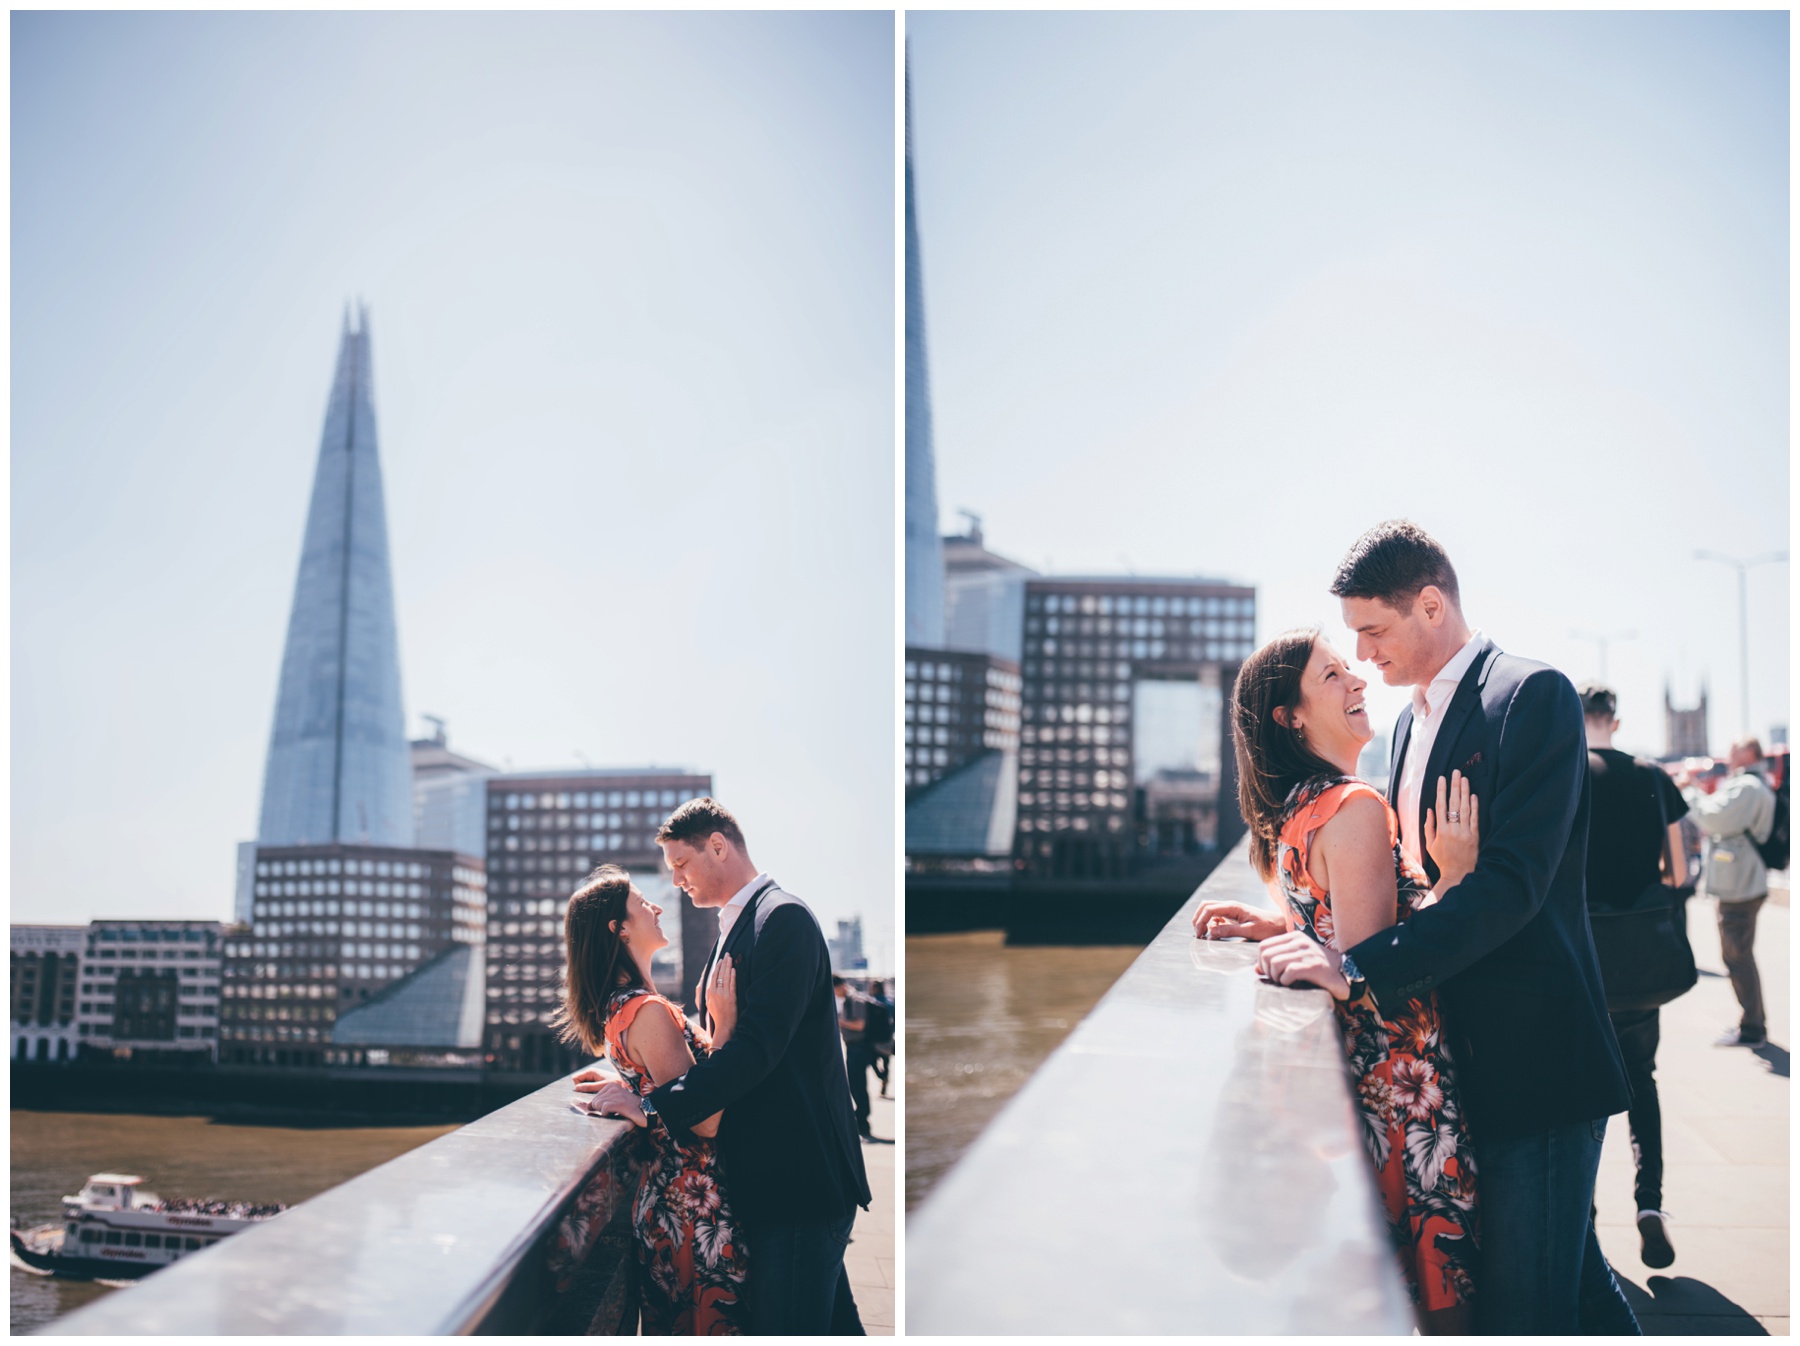 A pre-wedding photoshoot in London City Centre.